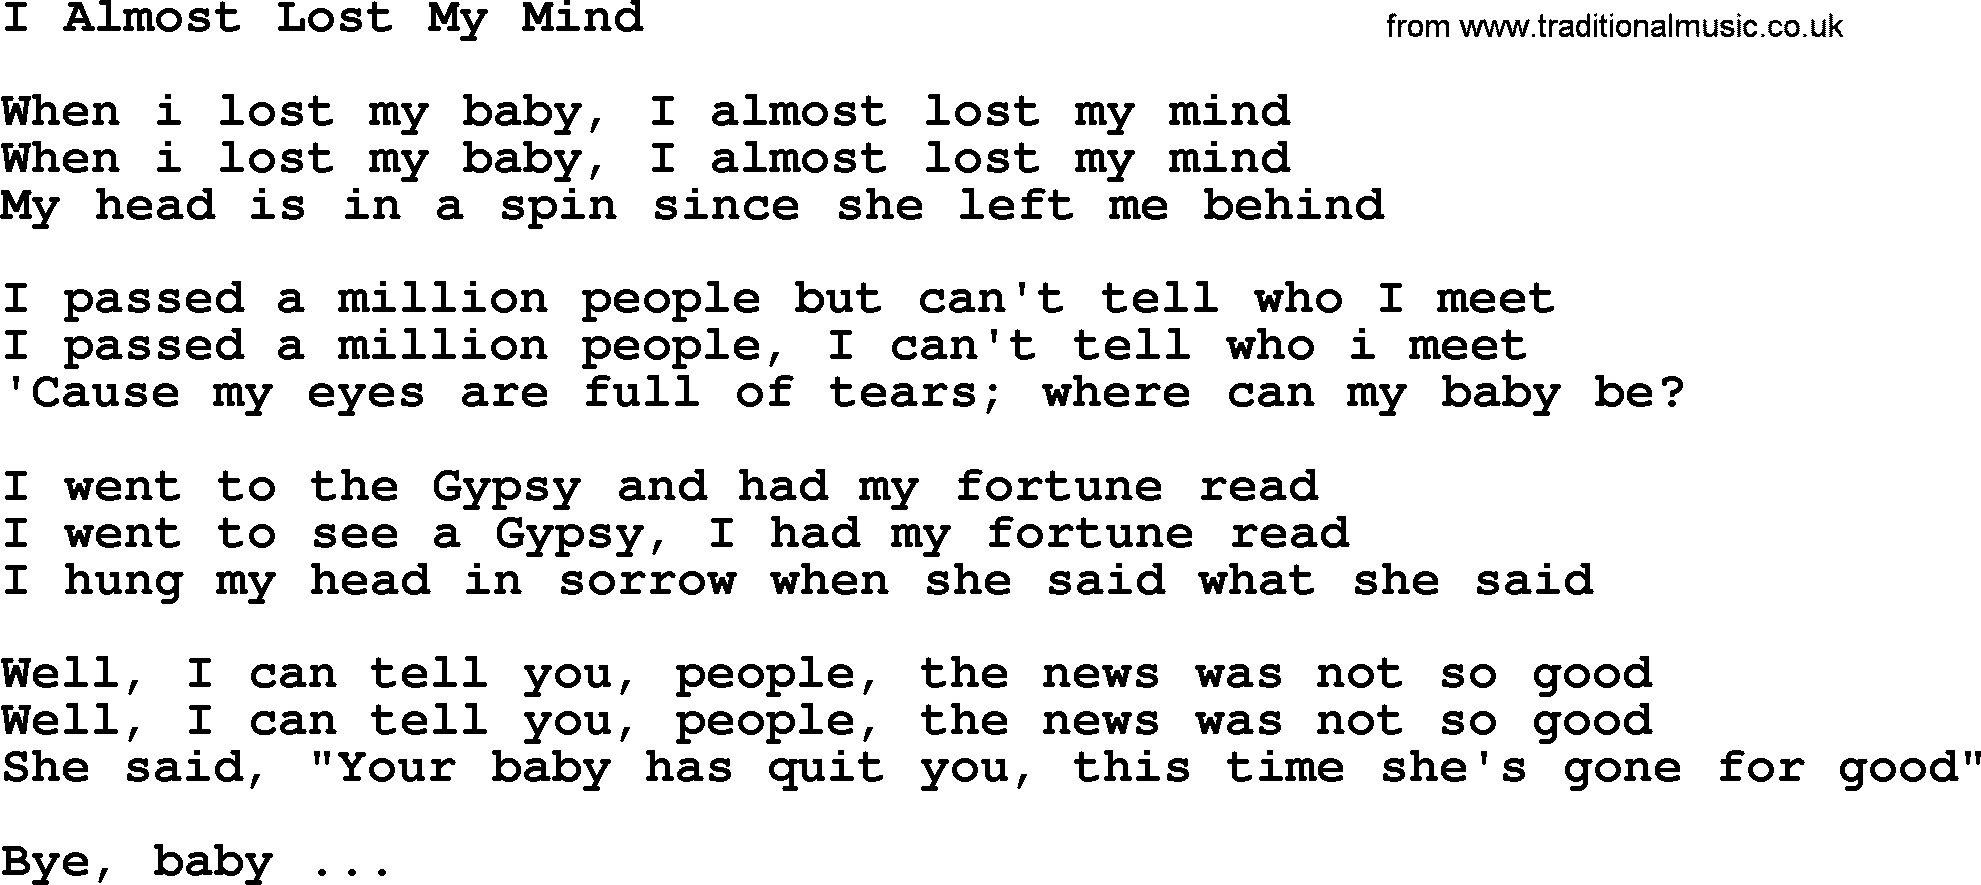 Willie Nelson song: I Almost Lost My Mind lyrics